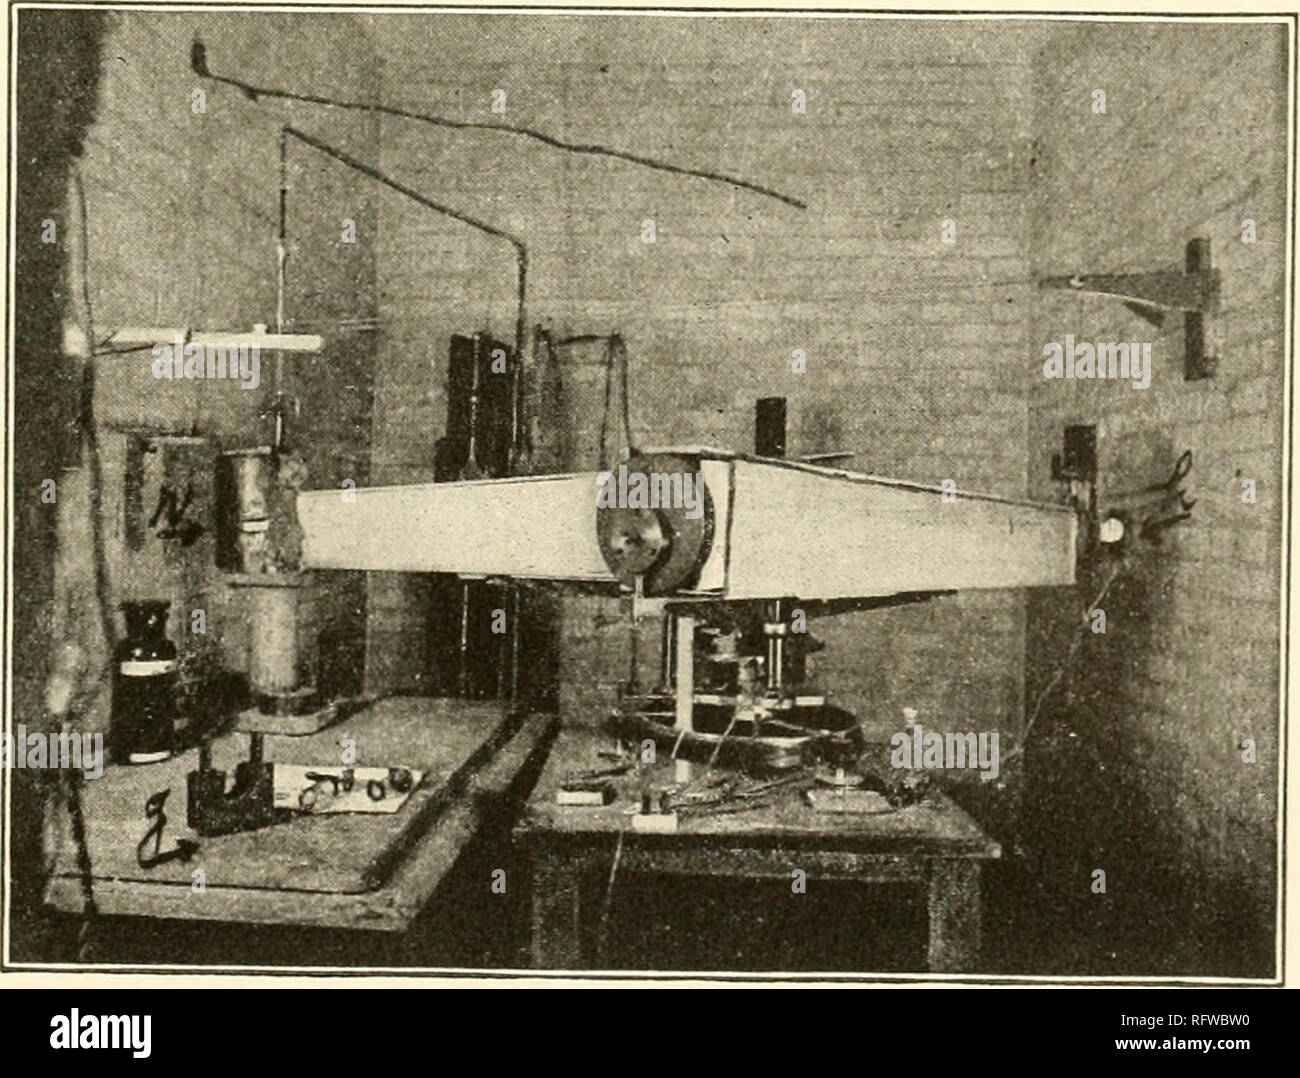 . Carnegie Institution of Washington publication. ^^ Fig. I. -Inner room containing radiometer R, spectrometer and prism P, exhaust pump G, lamps and scale L, and telescope T. C is the holder for the absorption cell. S is the shutter, H the Nernst lamp-heater.. Fig. 1 A.—Large spectrometer with Nernst heater, /*, to the right, and radiometer, r, to the left. The gas-cell holde and glass cells are shown at 9; Ceissler pump in the rear. Photograph taken through doorway of inner room.. Please note that these images are extracted from scanned page images that may have been digitally enhanced for Stock Photo